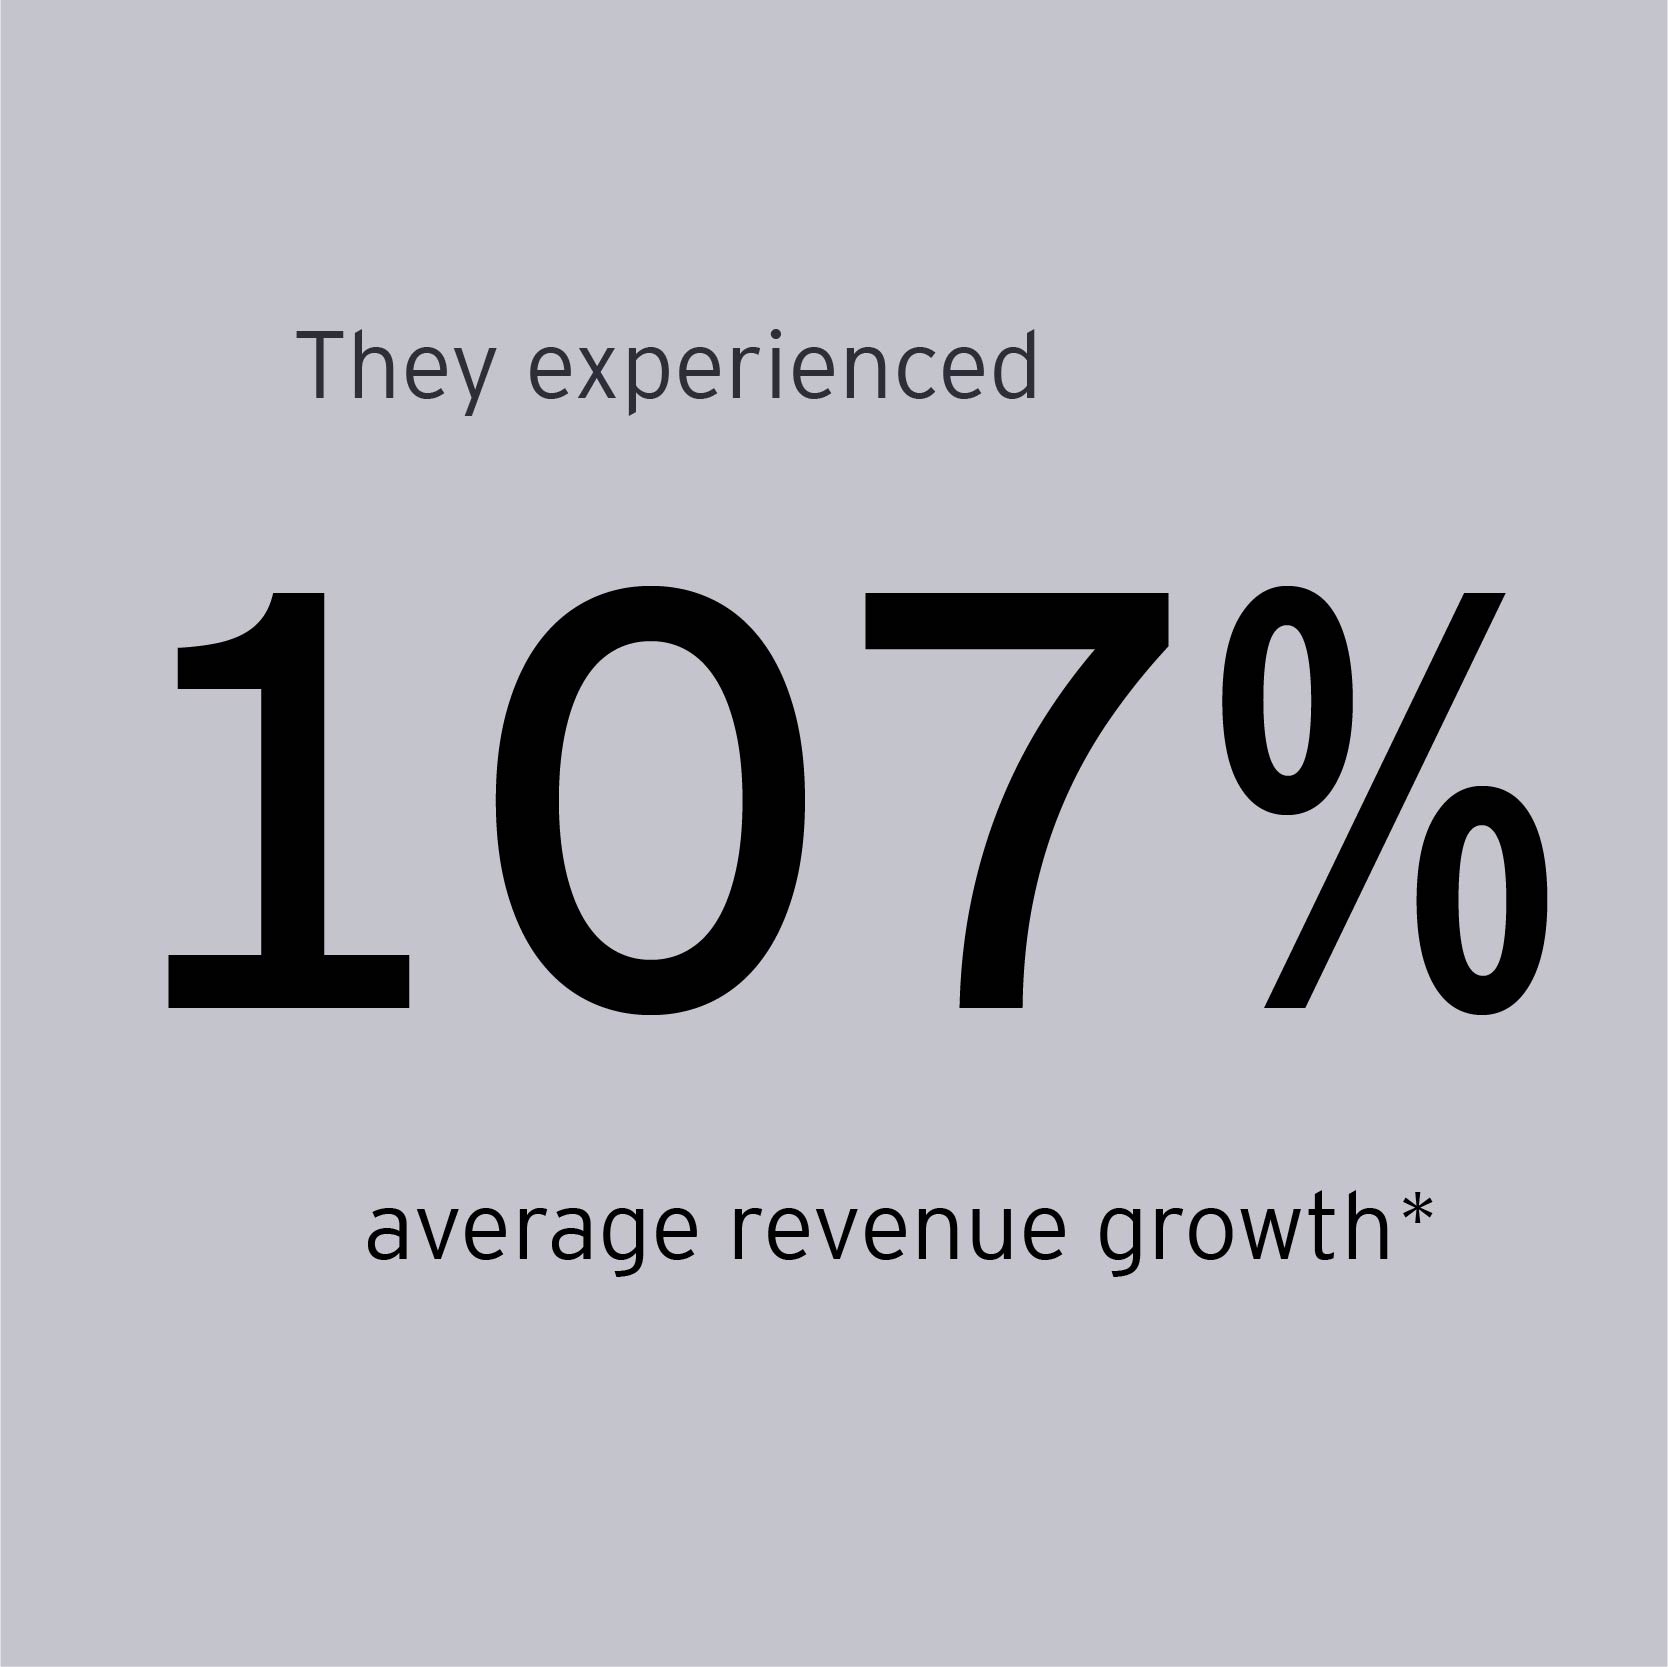 EOY New York finalists experienced 107% average revenue growth